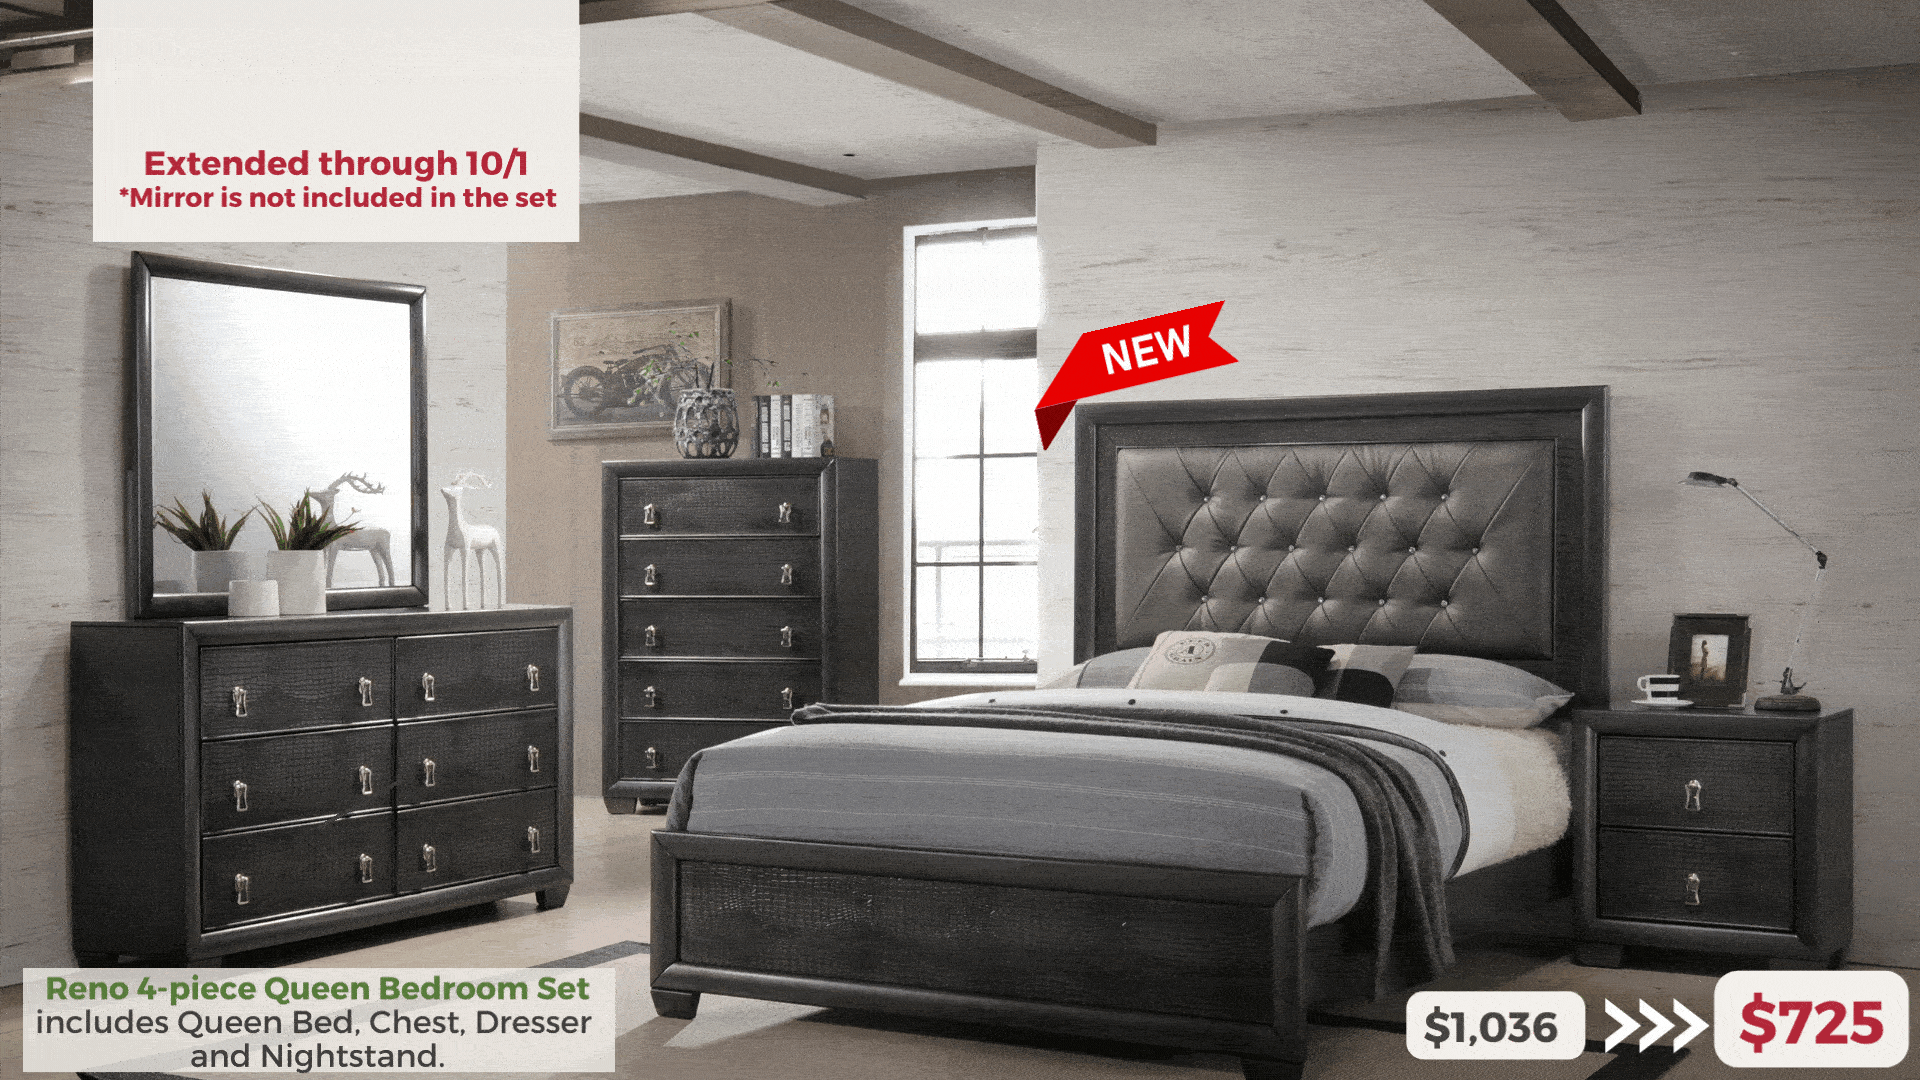 Reno 4-piece Queen Bedroom Set includes Queen Bed, Chest, Dresser  and Nightstand. 30% OFF Extended through 10/1 *Mirror is not included in the set